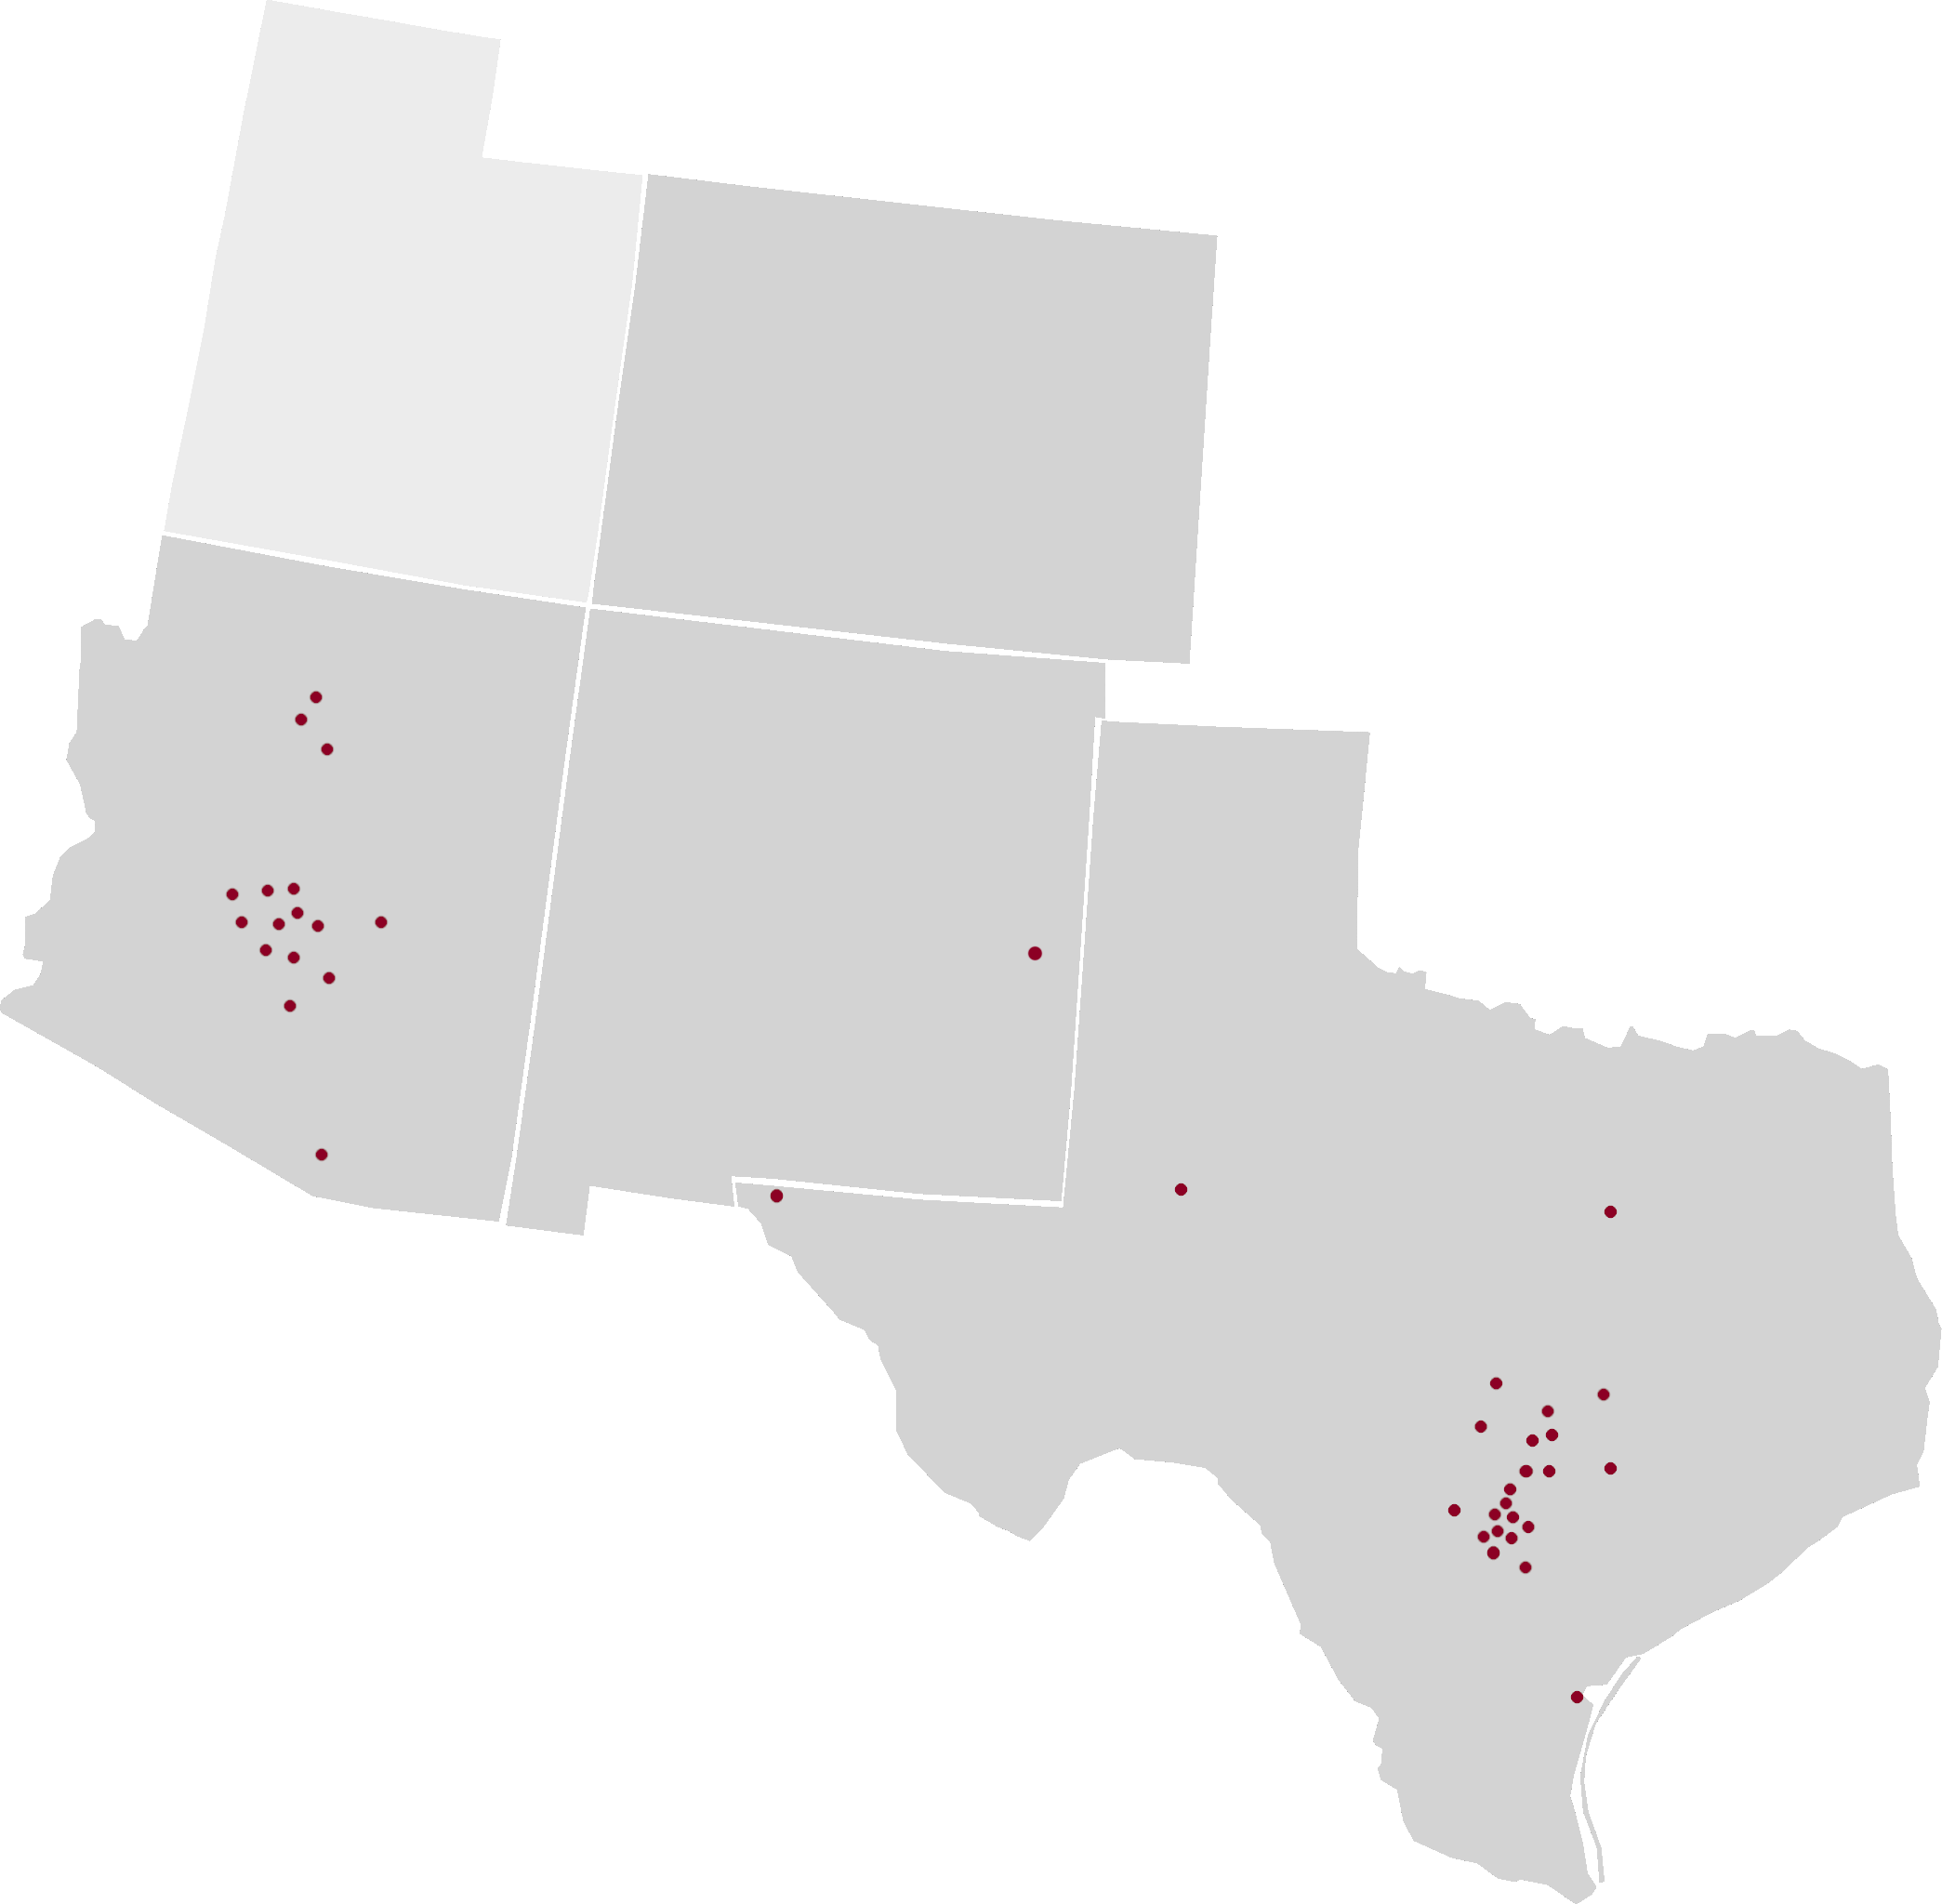 A map of Texas with red dots. Contact MGC for more information.